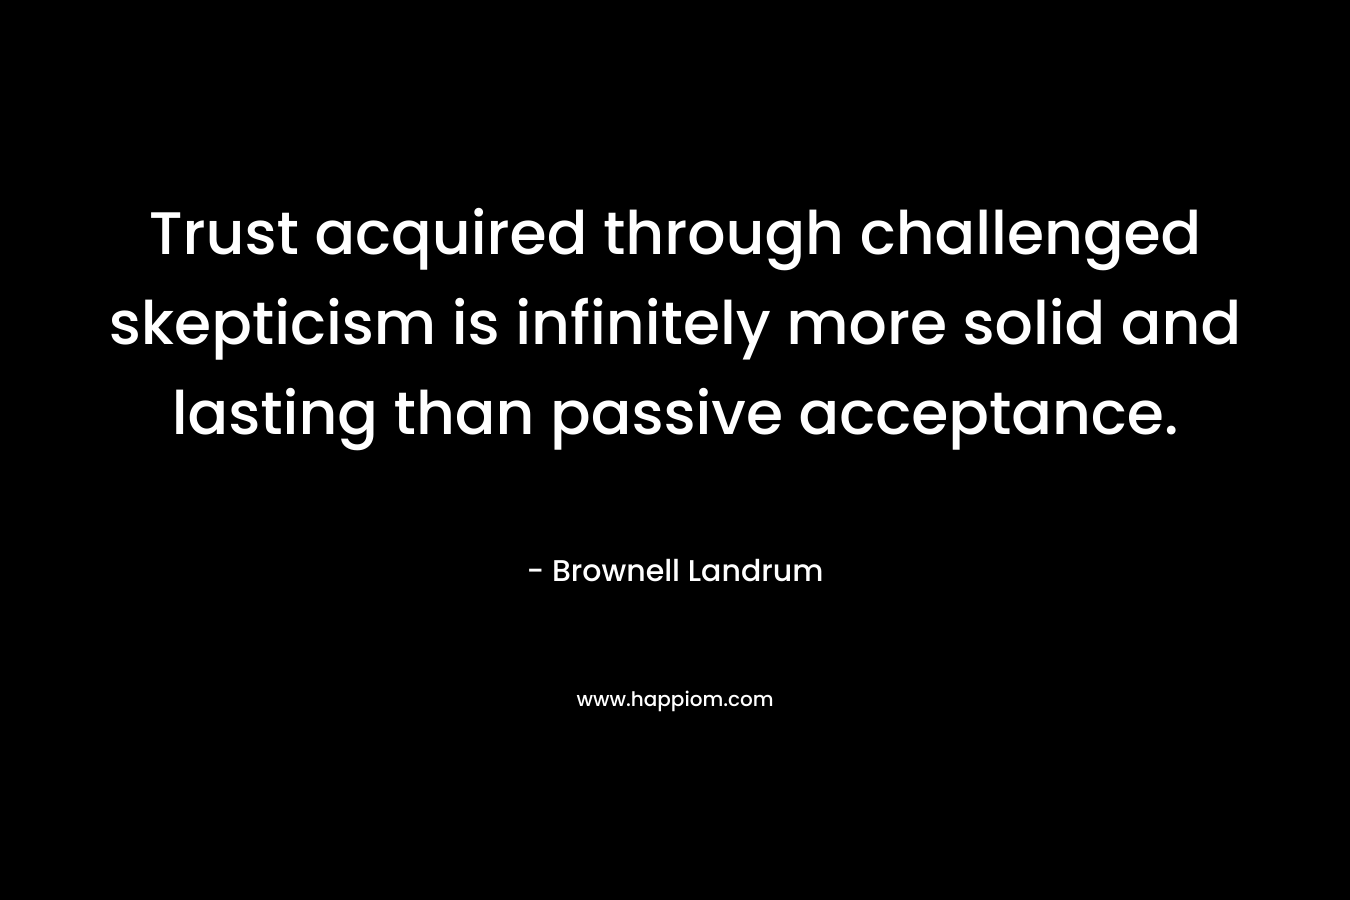 Trust acquired through challenged skepticism is infinitely more solid and lasting than passive acceptance. – Brownell Landrum